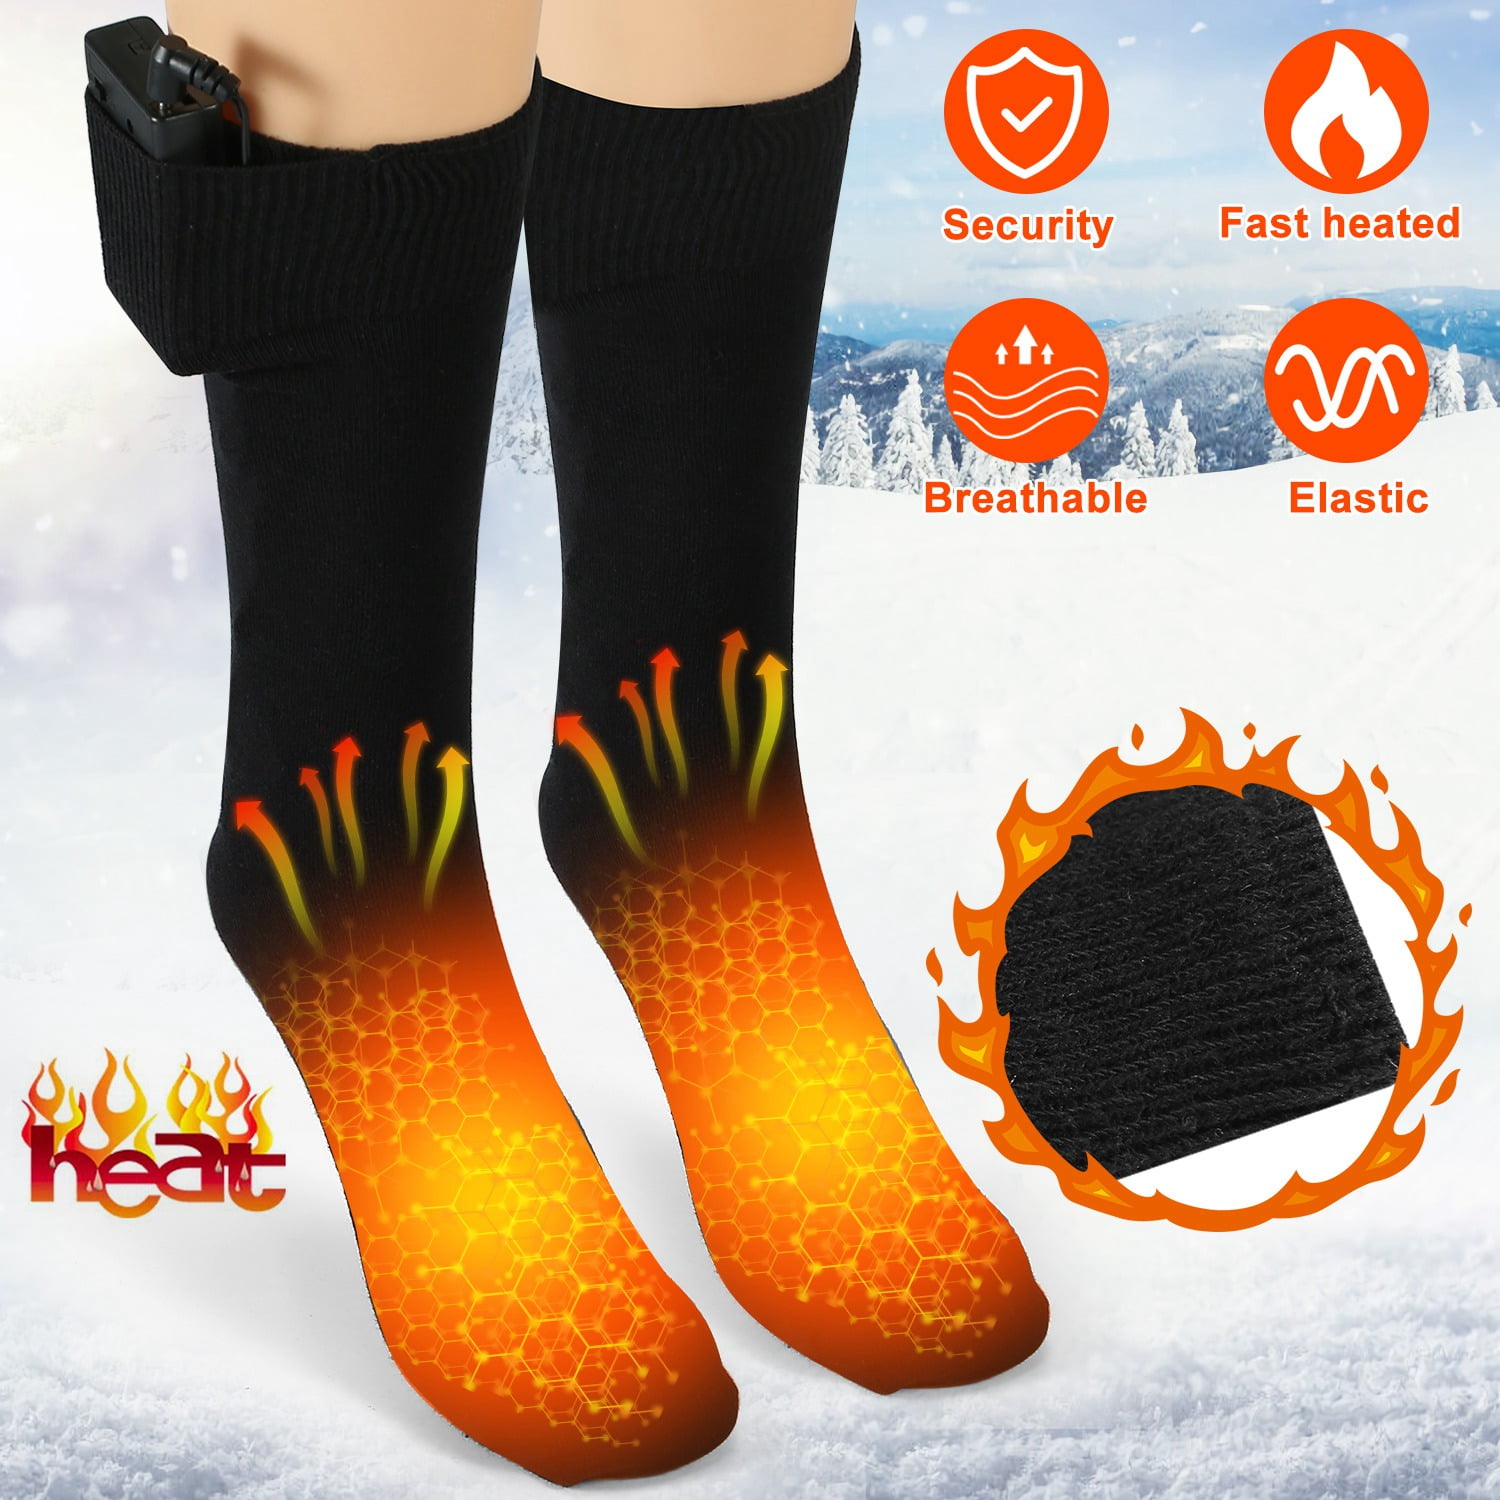 Electric Heated Socks Rechargeable Battery Foot Winter Warmer Thermal Sock NEW 